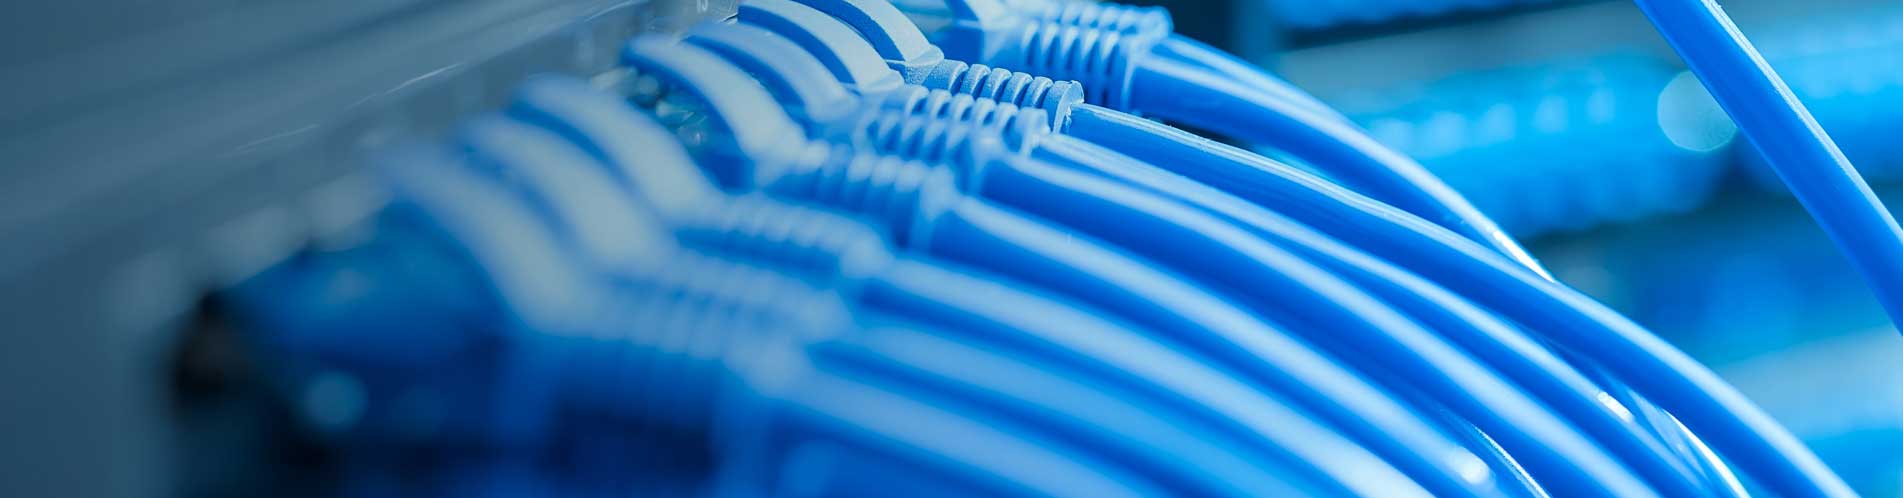 Choose from thousands of Ethernet Cables, Cat 5 Ethernet Cables, Network Cables options